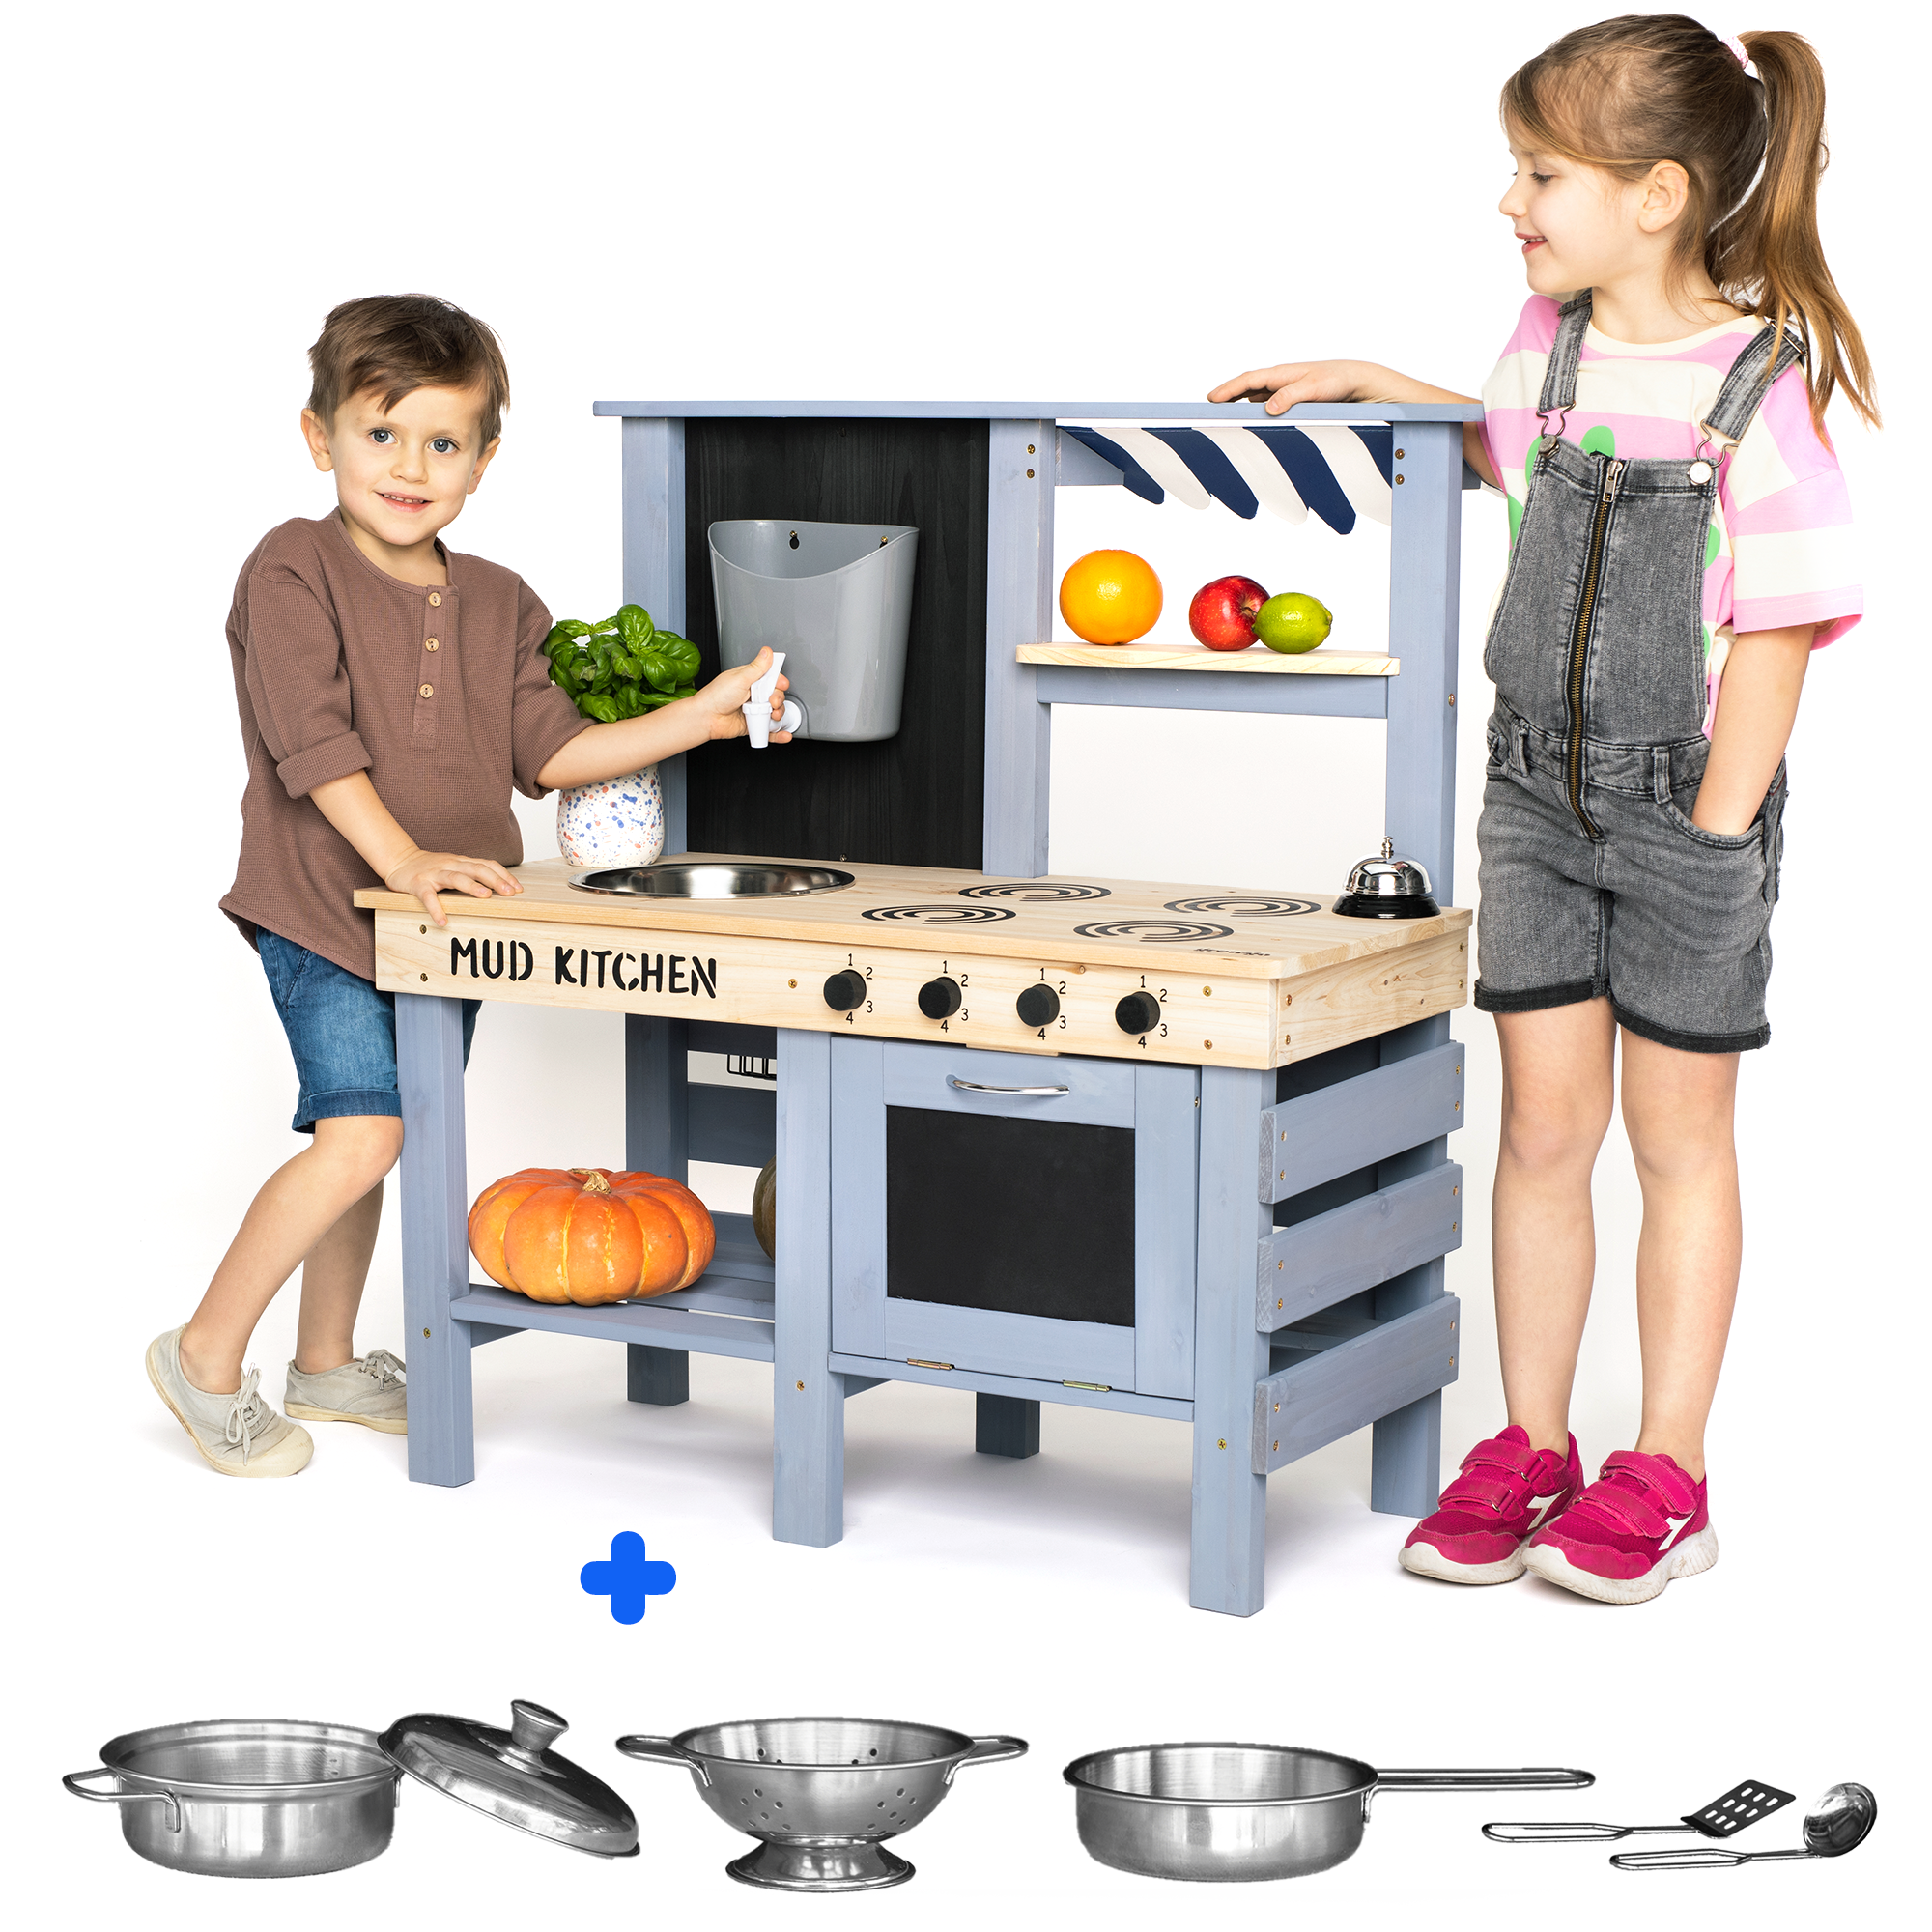 2 In 1 Wooden Outdoor Mud Kitchen & Grocery Store Pretend Play